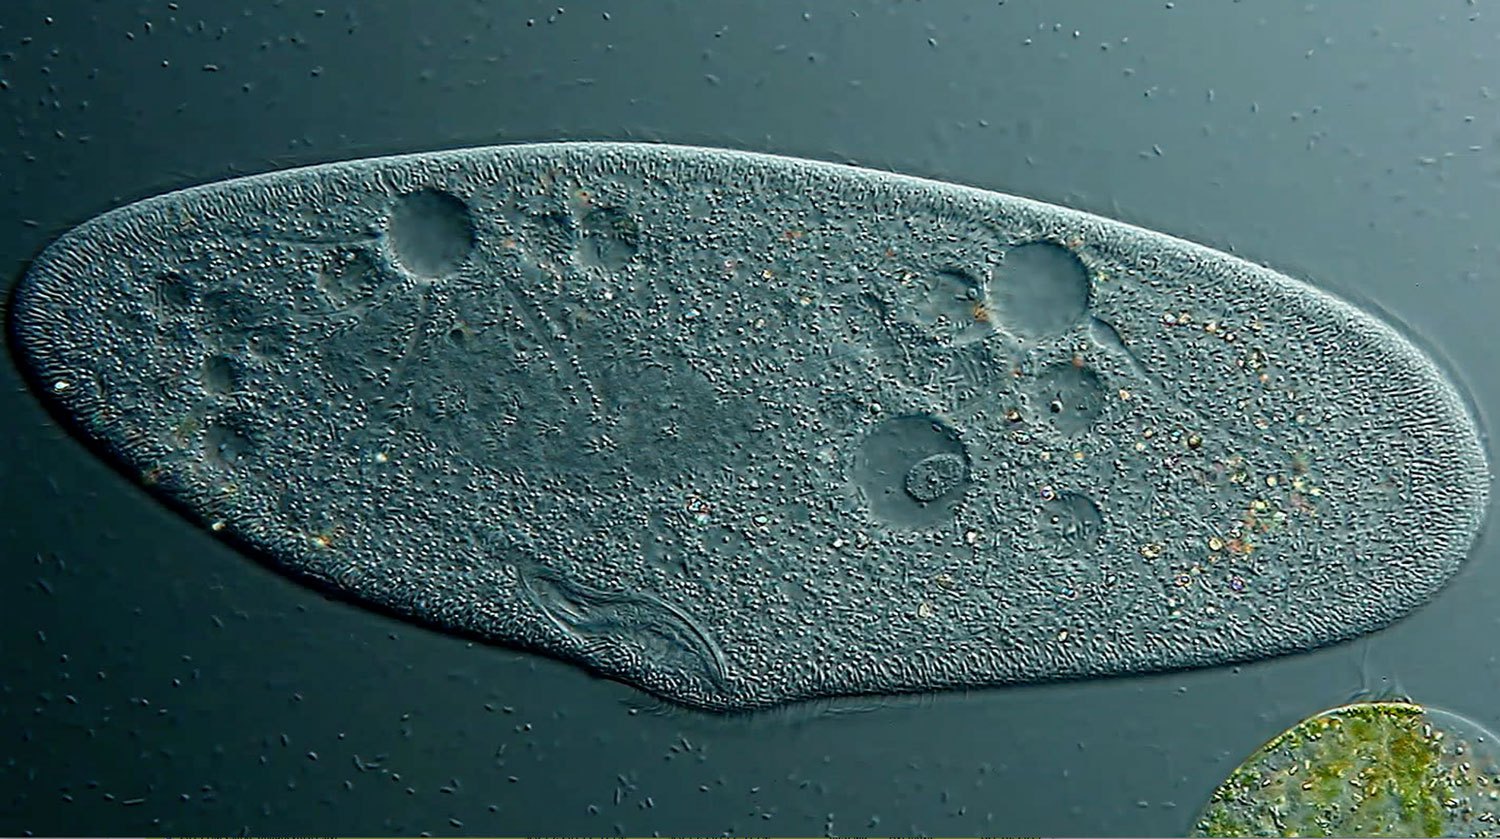 10th Place (Video Still): Paramecium, showing contactile vacuole and ciliary motion.